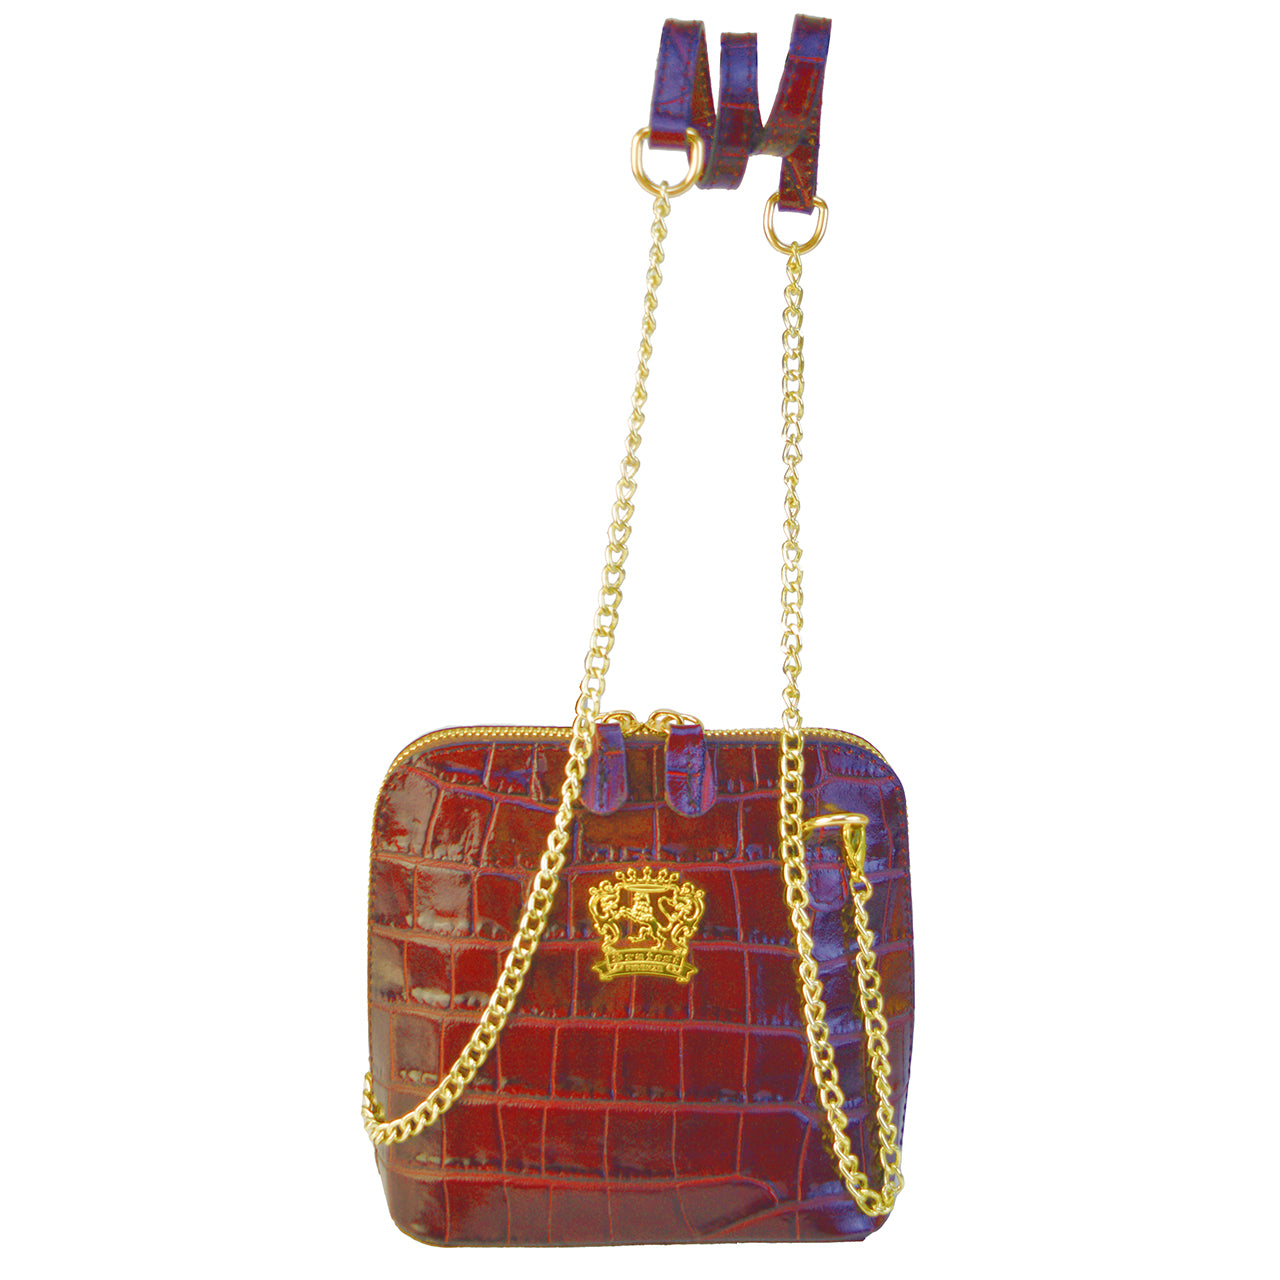 Pratesi Volterra King Lady Bag in real leather - Croco Embossed Leather Chianti